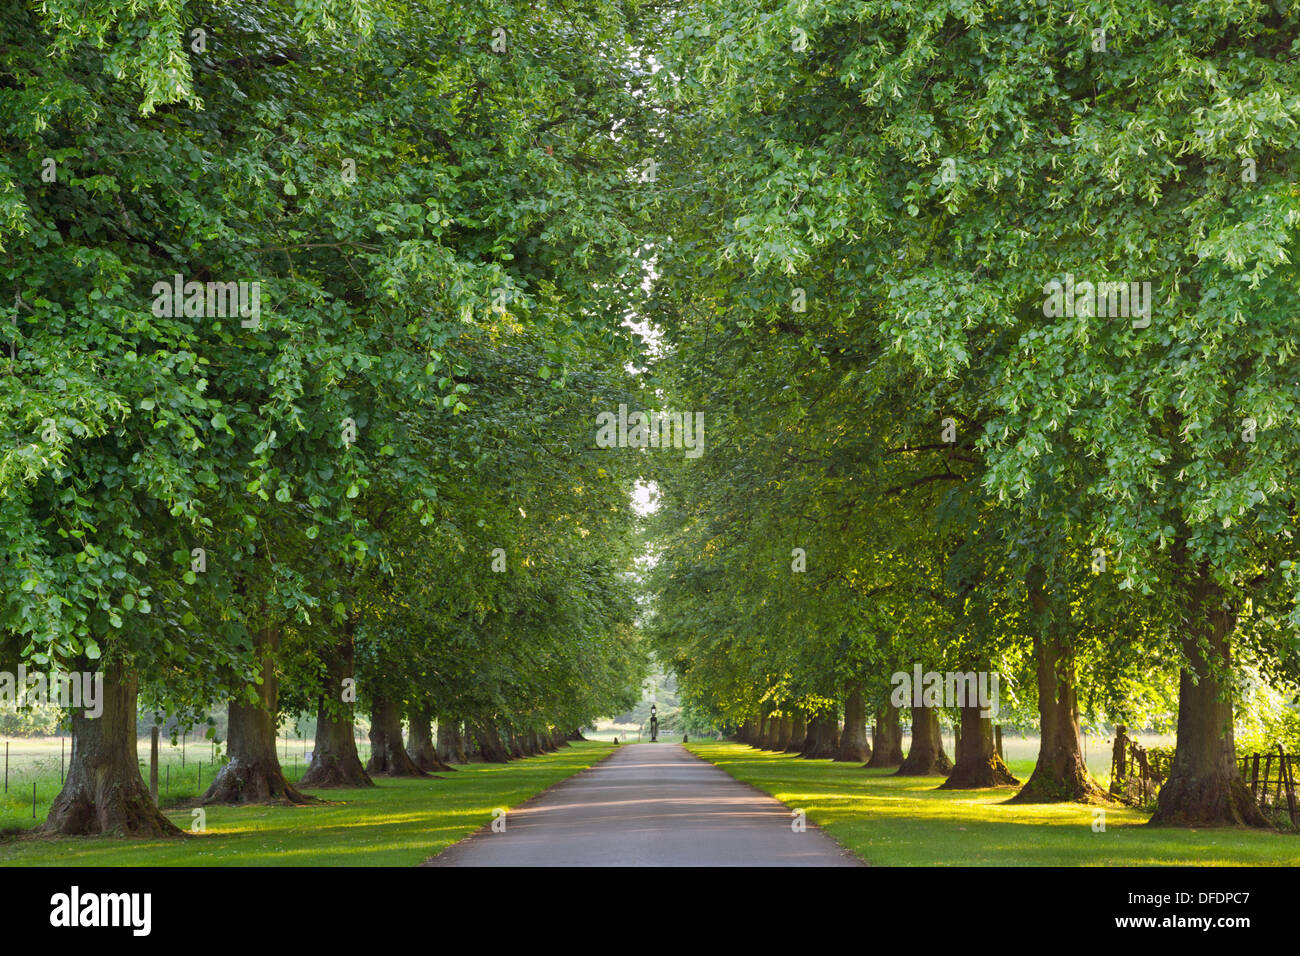 Late evening sunlight shining through the gaps of a Lime tree lined country road. Stock Photo